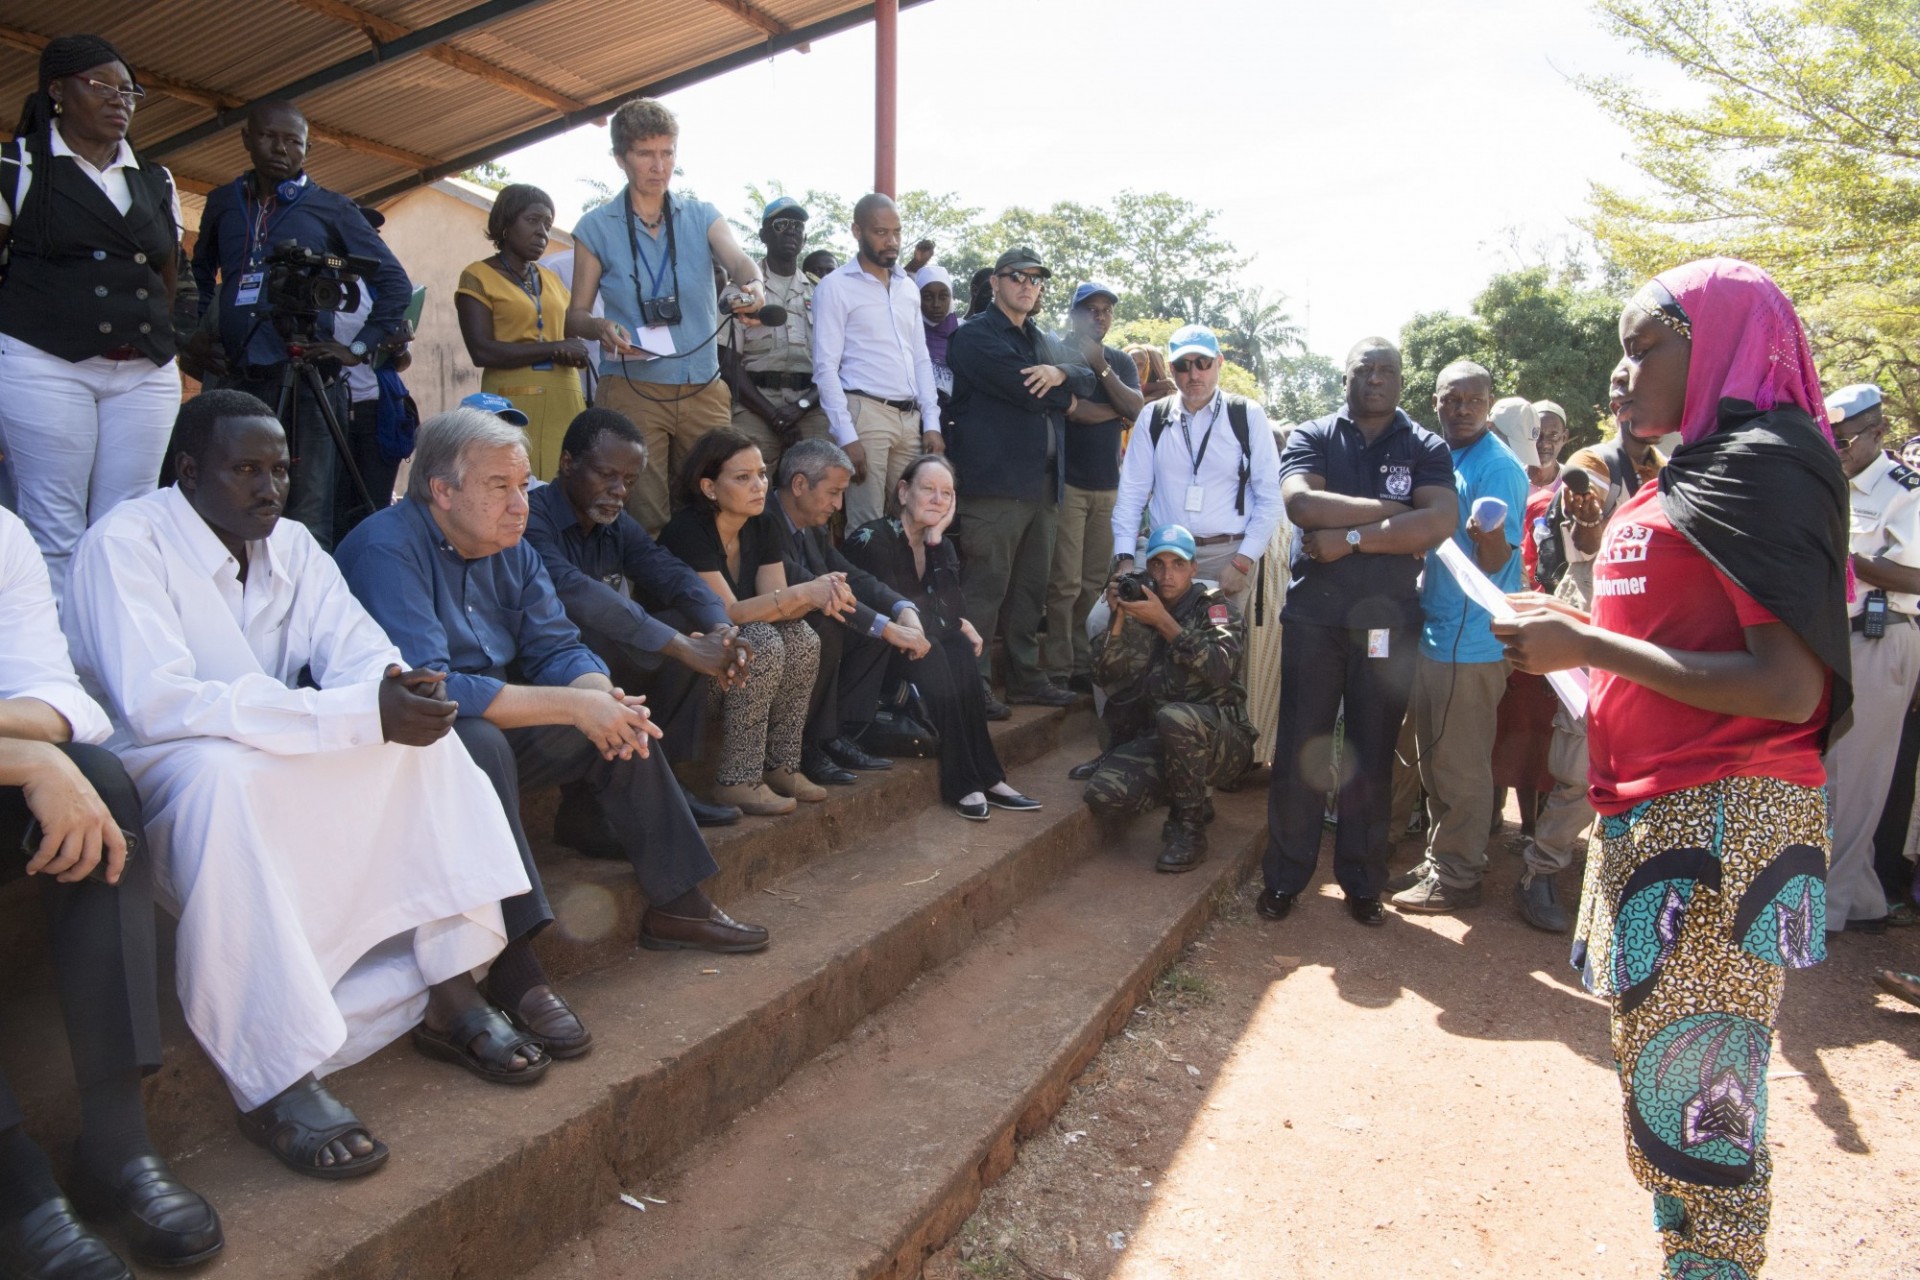 The Victims’ Rights Advocate’s first visit to the Central African Republic with the Secretary-General in October 2017. UN Photo/Eskinder Debebe.